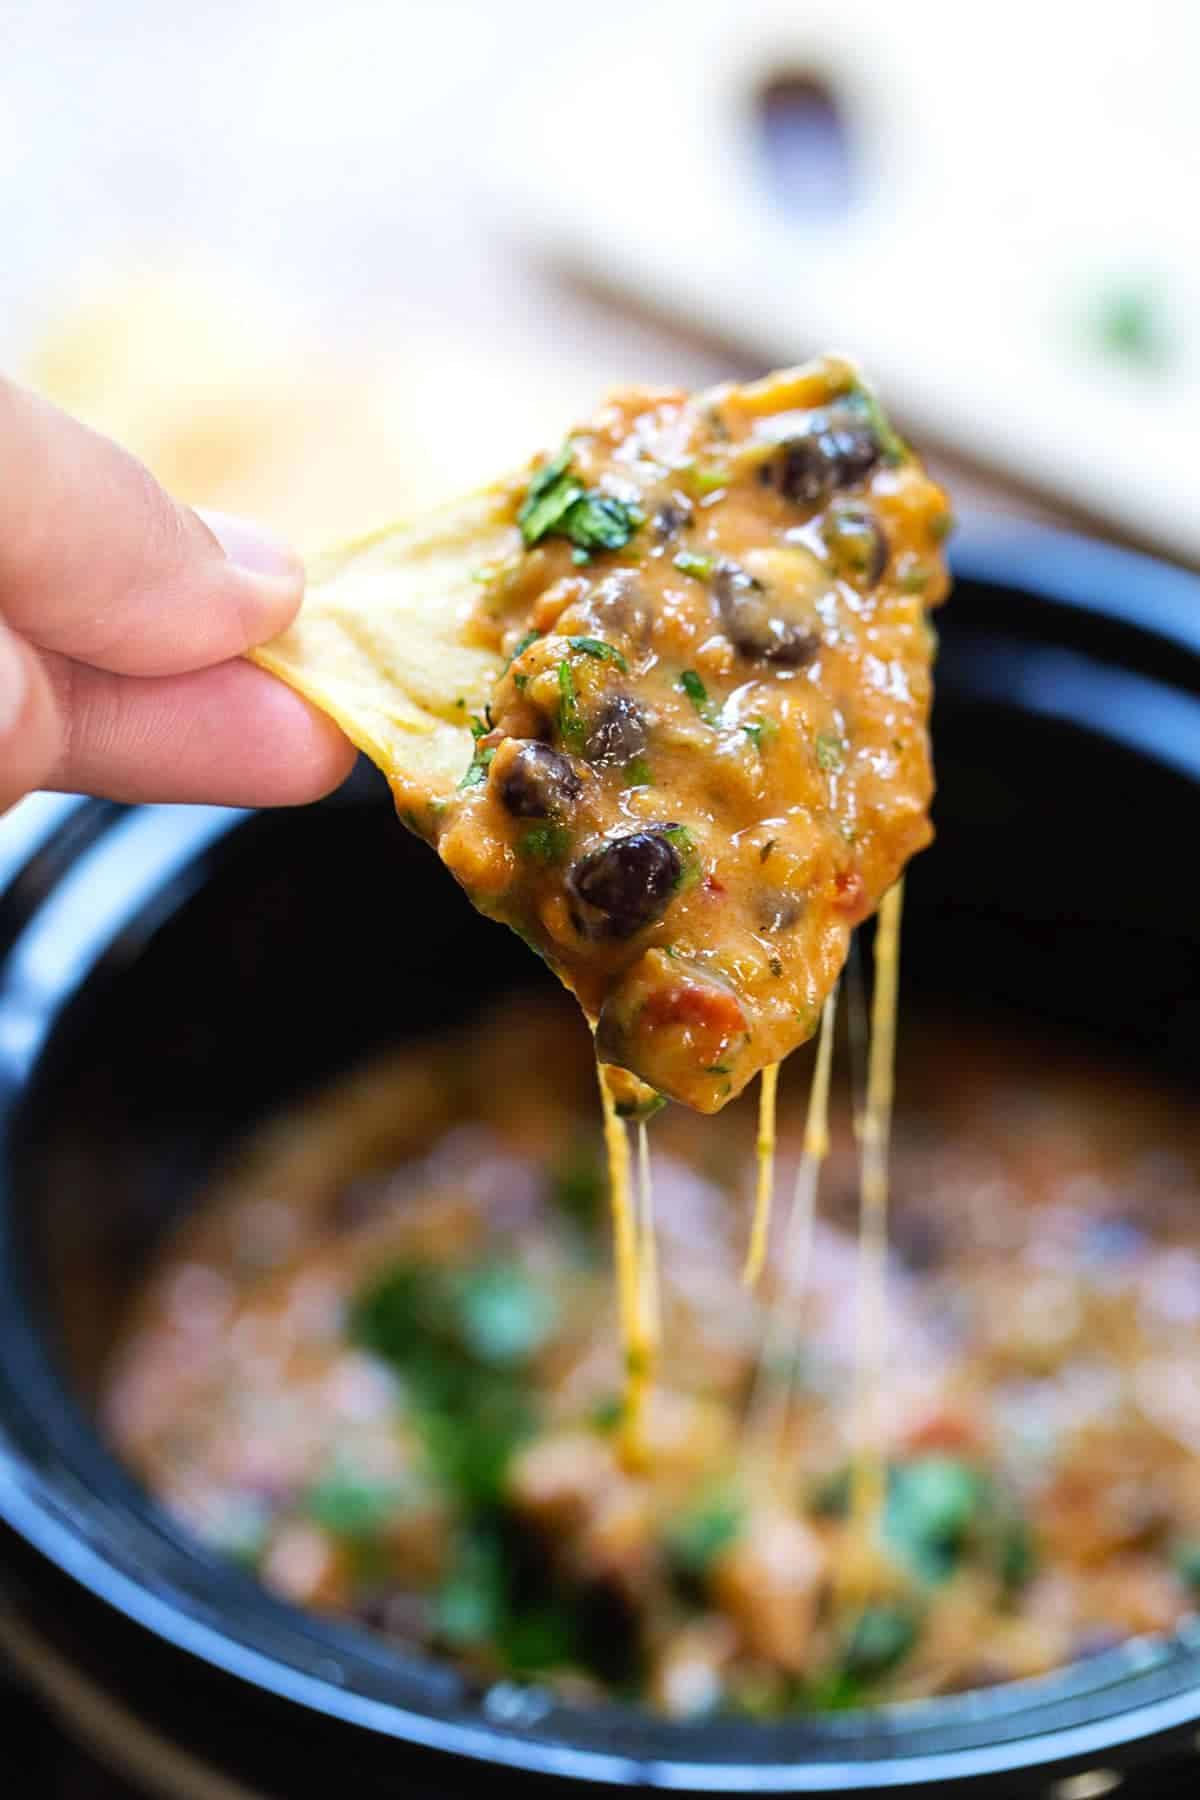 Crockpot Taco Dip Recipe - Perfect for Tailgating - Moms with